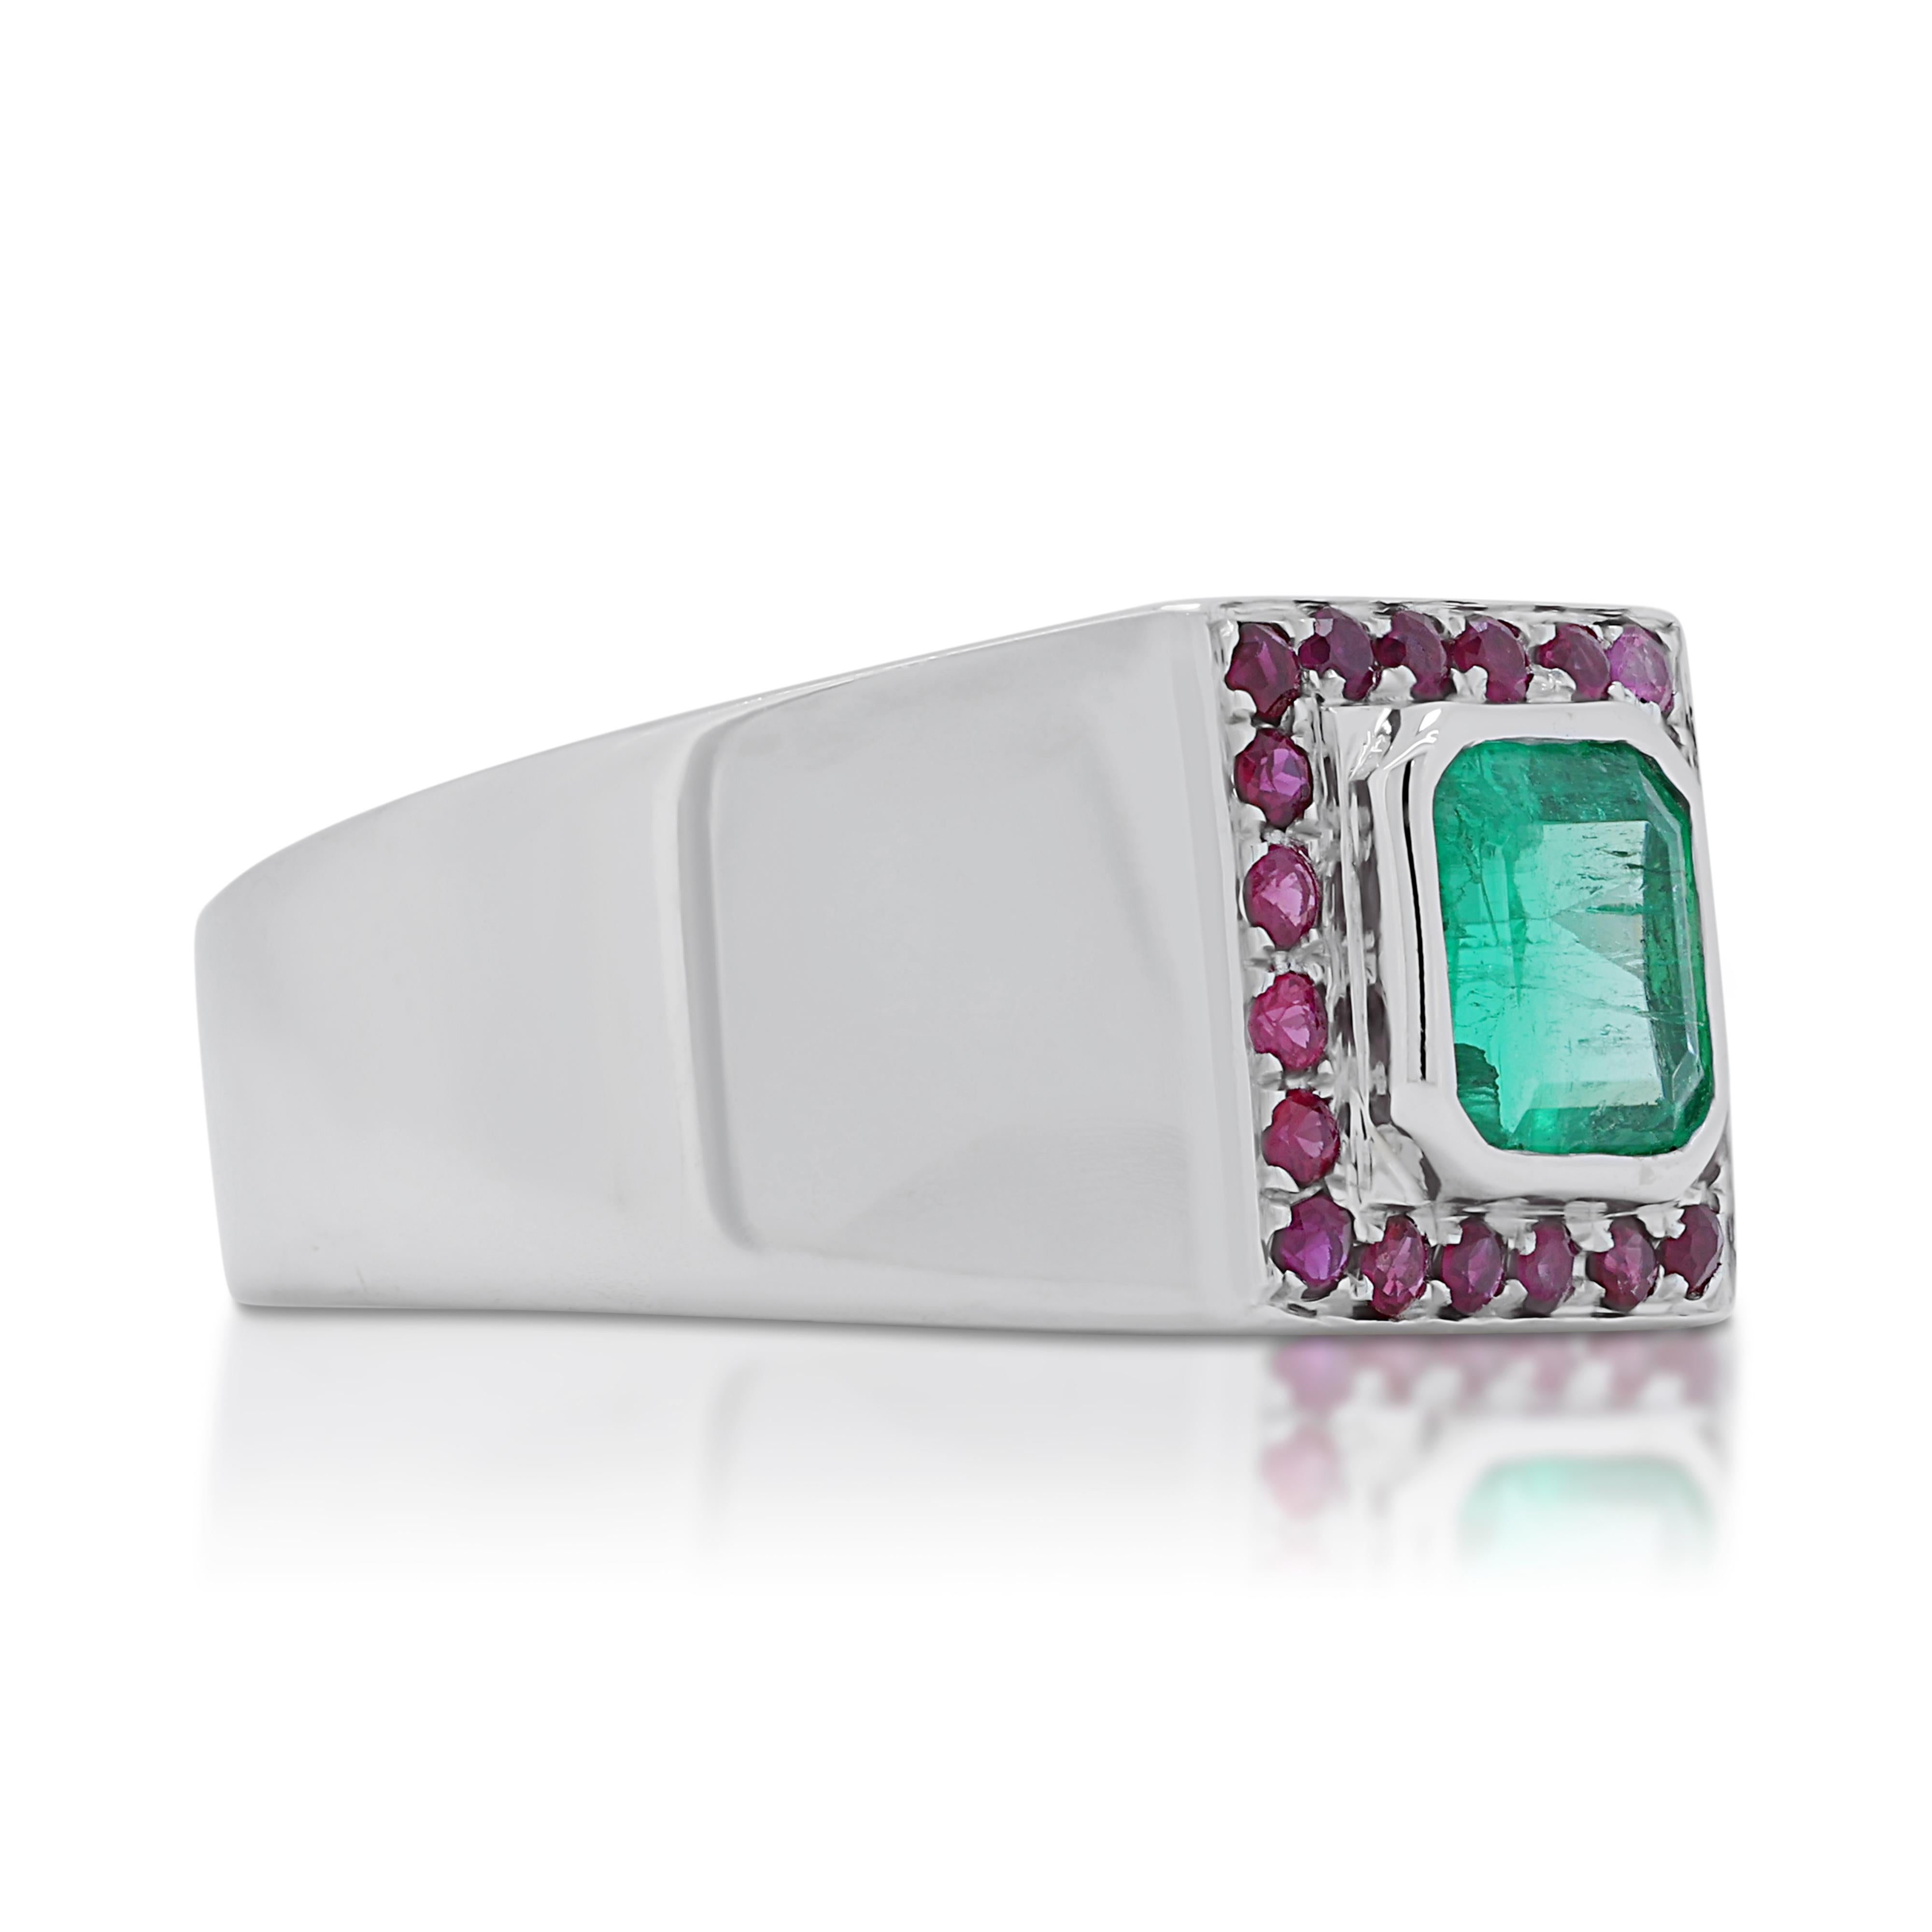 Stylish 1.05ct Emerald Dome Ring in 18K White Gold with Rubies In Excellent Condition For Sale In רמת גן, IL